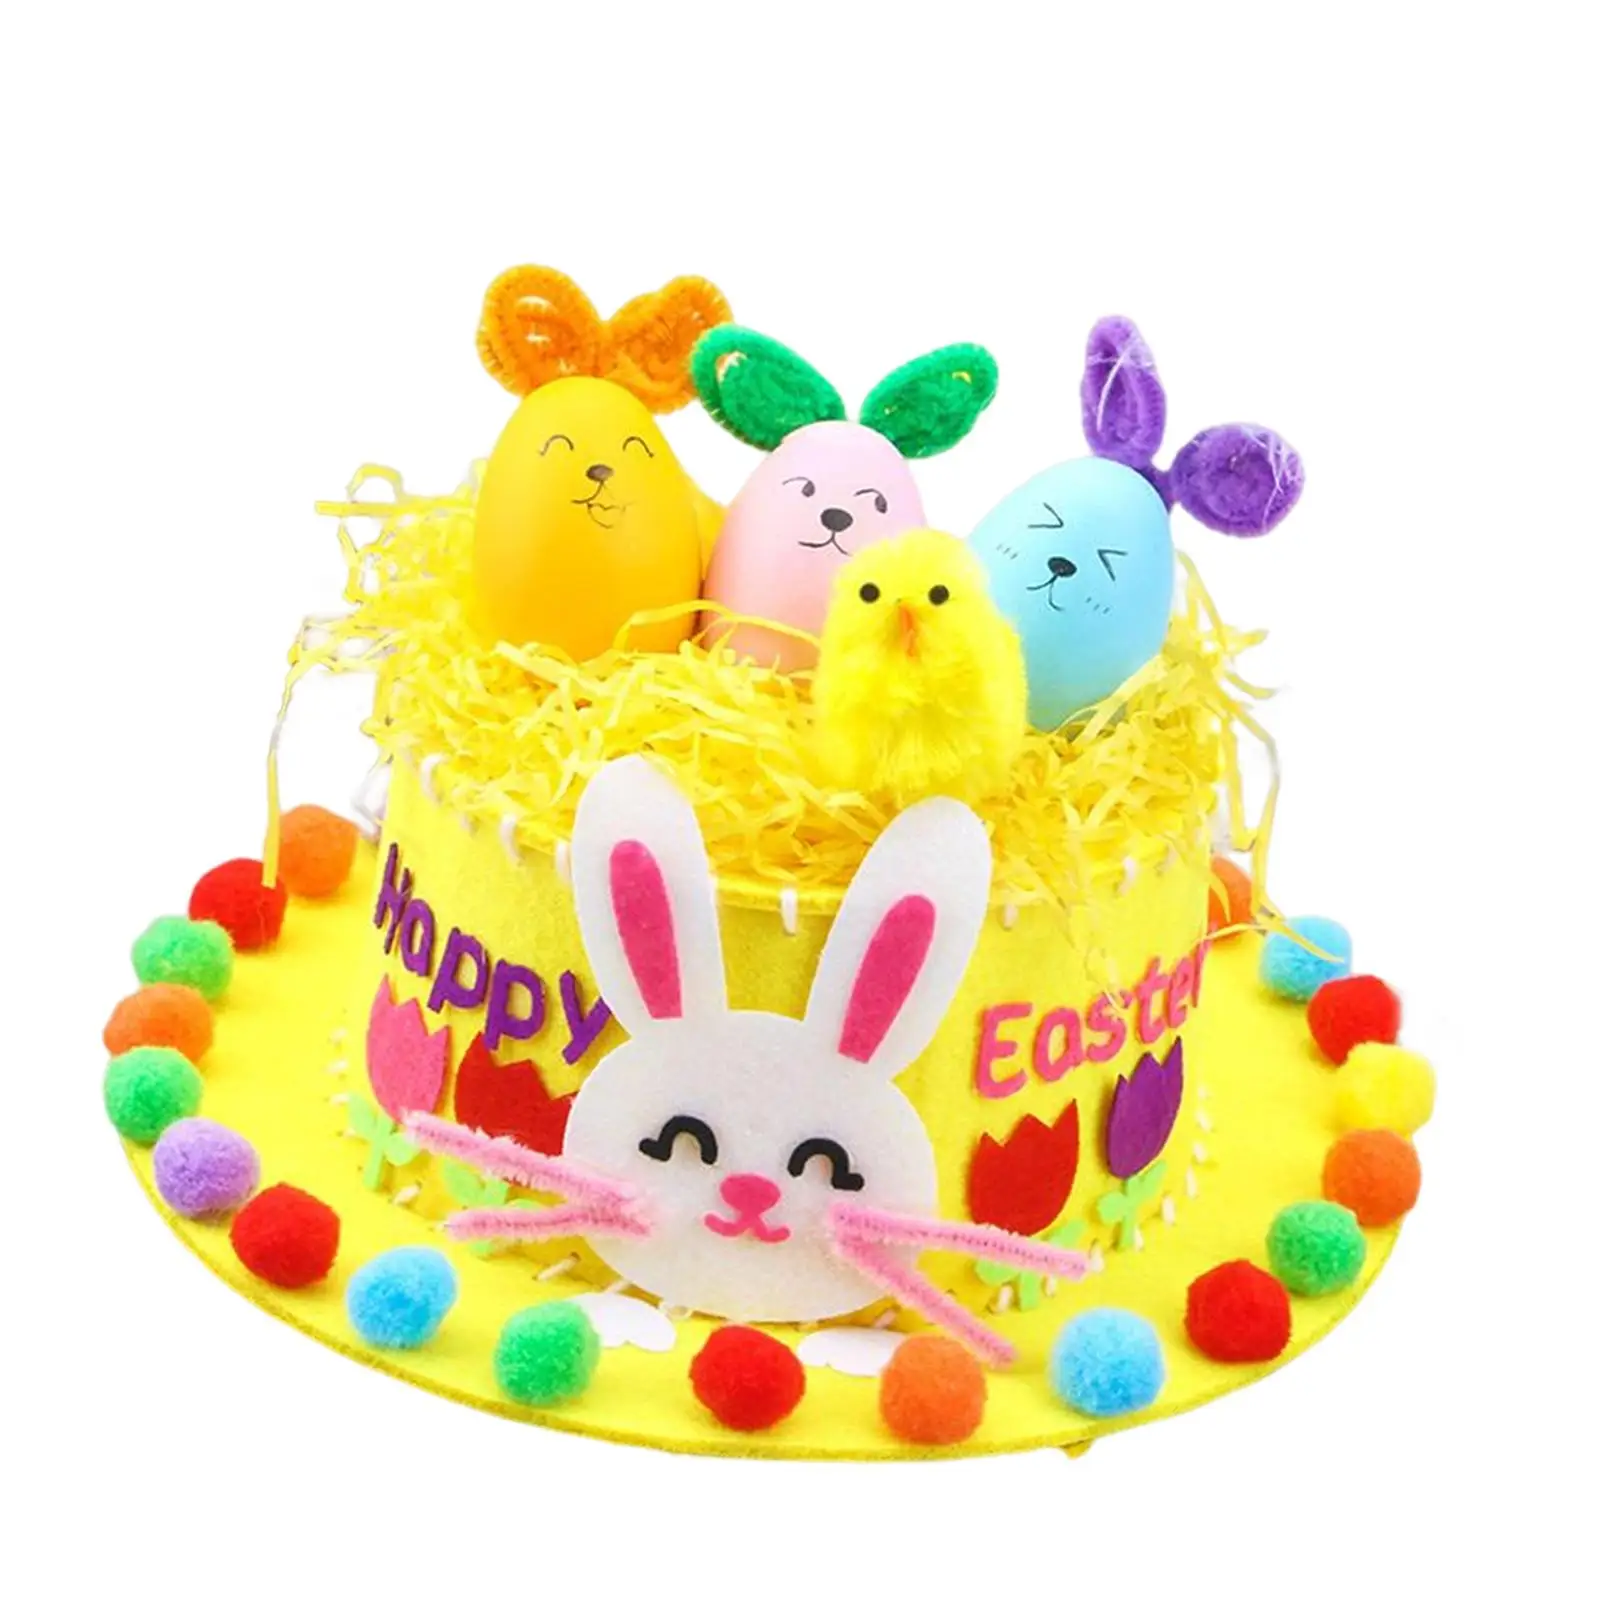 Easter Bonnet Material Handmade Crafts Made of Non Woven Fabric